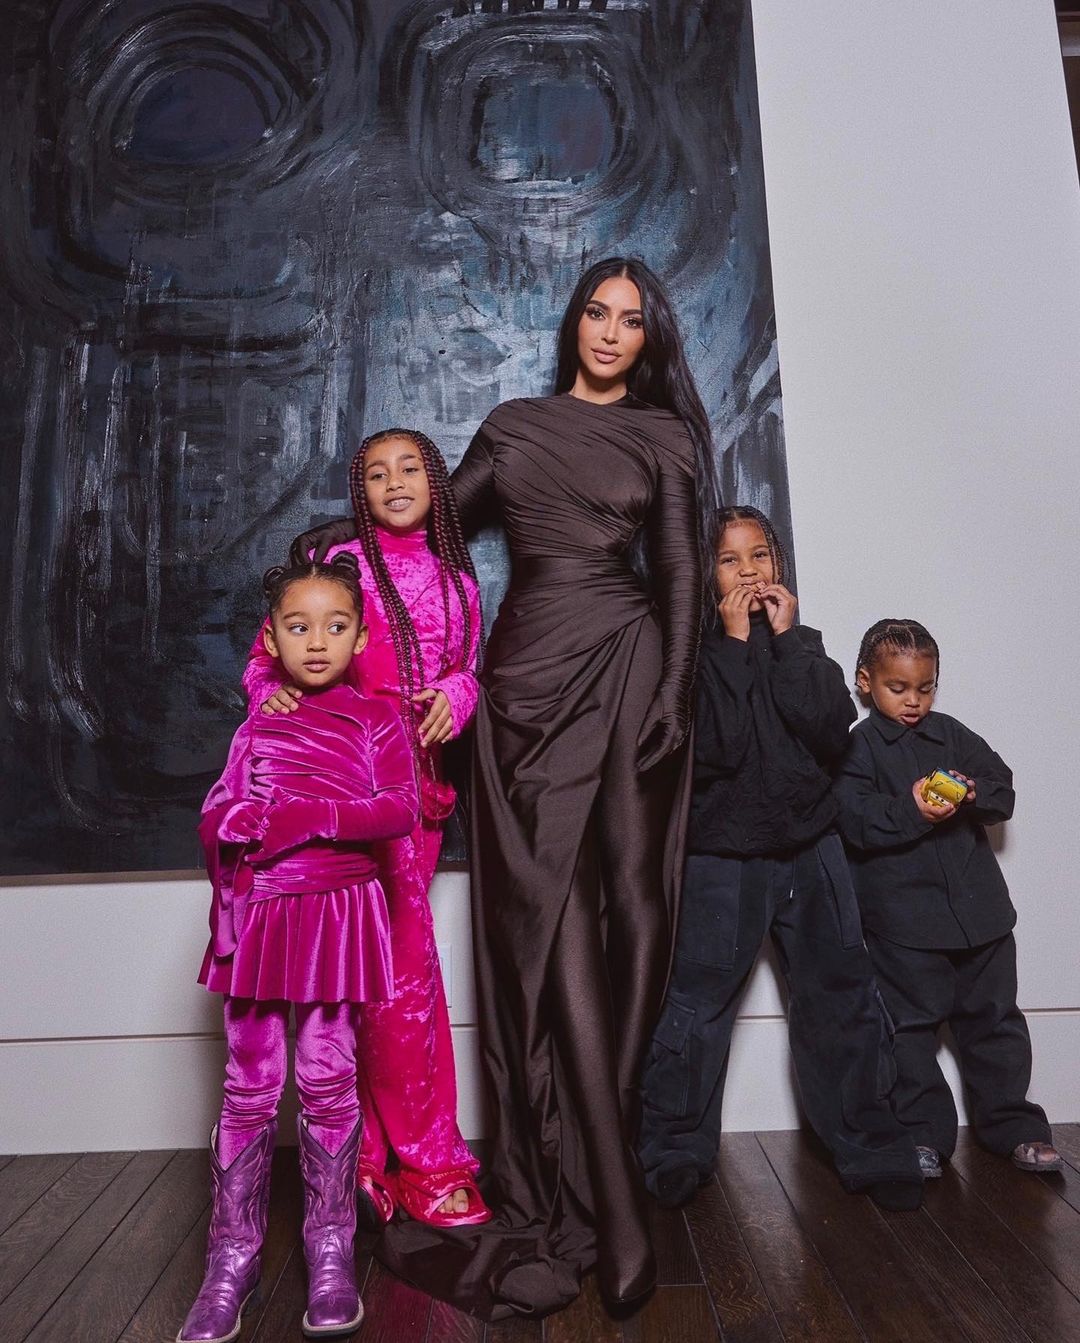 Kim took a 2022 group photo with her four kids